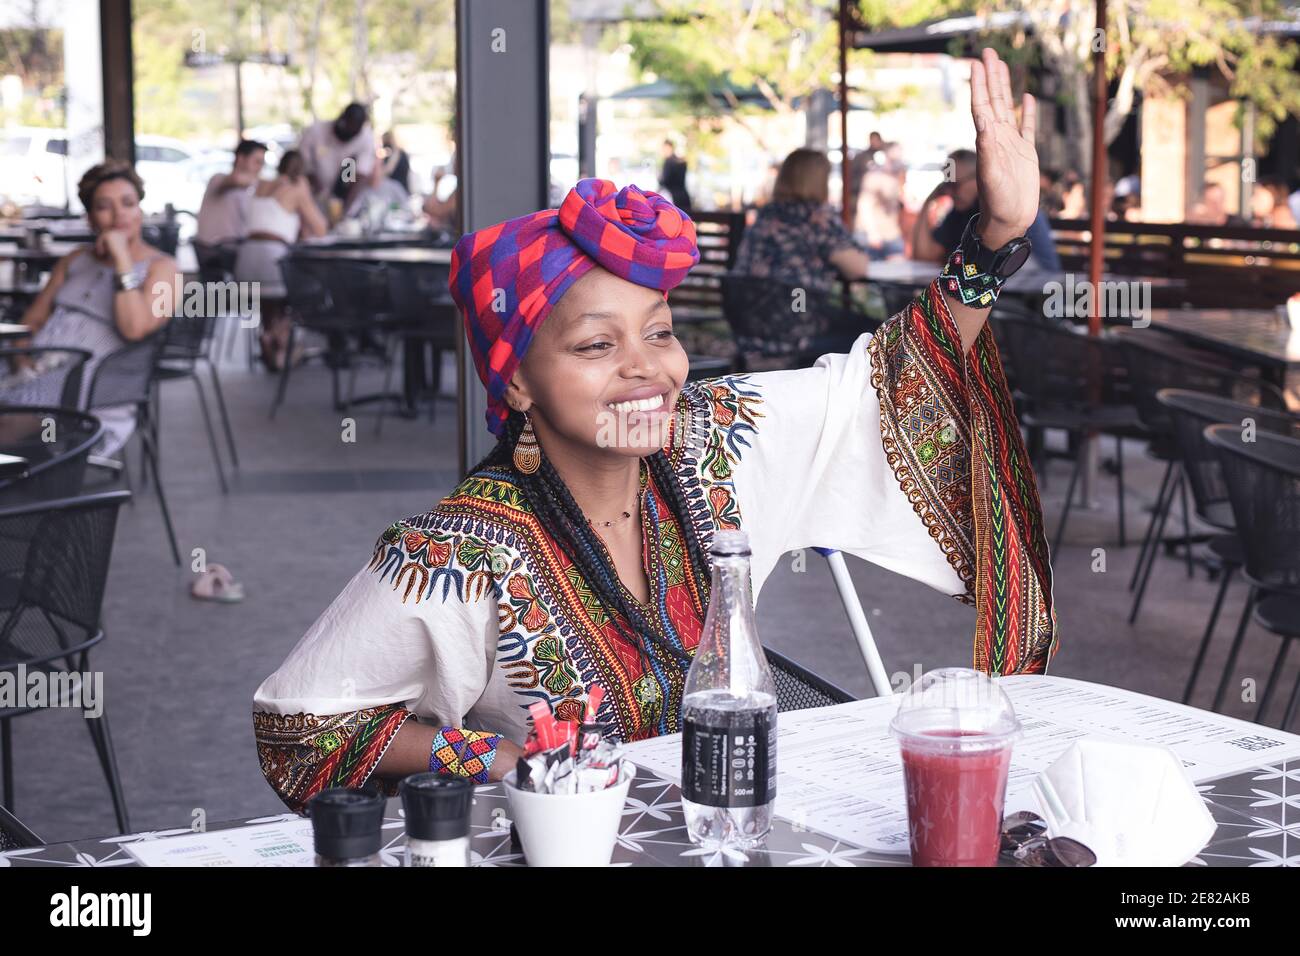 Fashionable African lady wearing a doek or head scarf waving at a friend Stock Photo